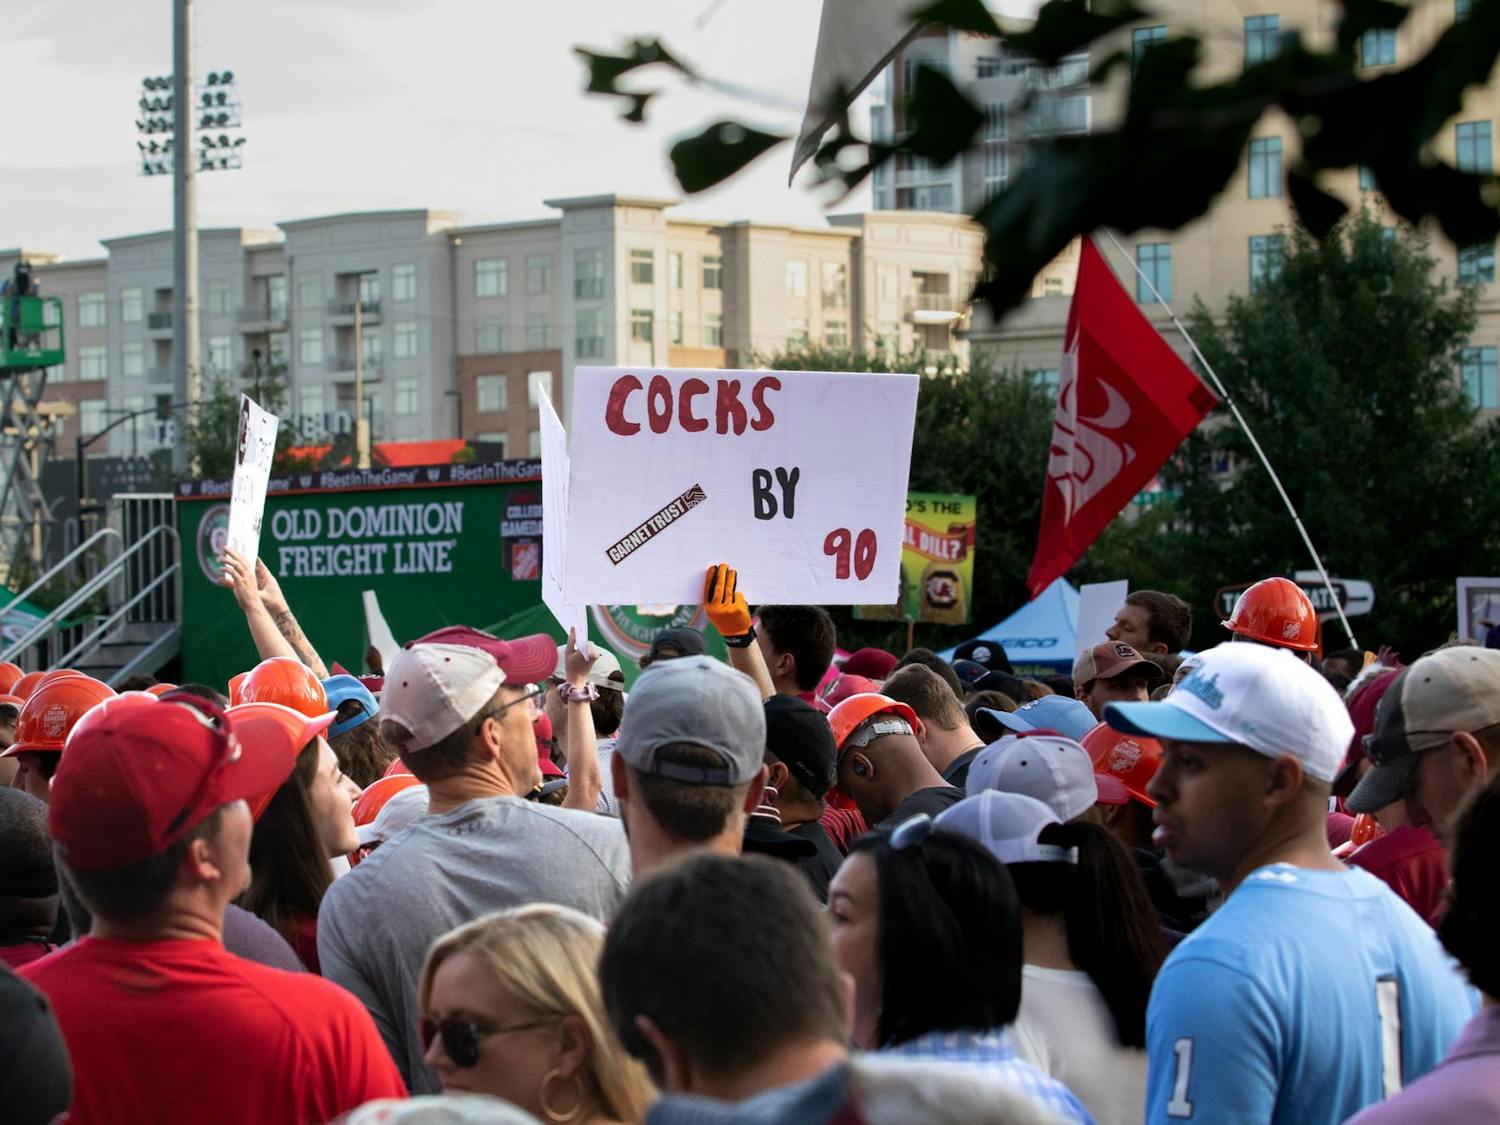 A “Cocks by 90” sign is displayed above thousands of fans gathered for College GameDay. “Cocks by 90” is a slogan used by Gamecocks fans to express confidence in the team's chance of winning.